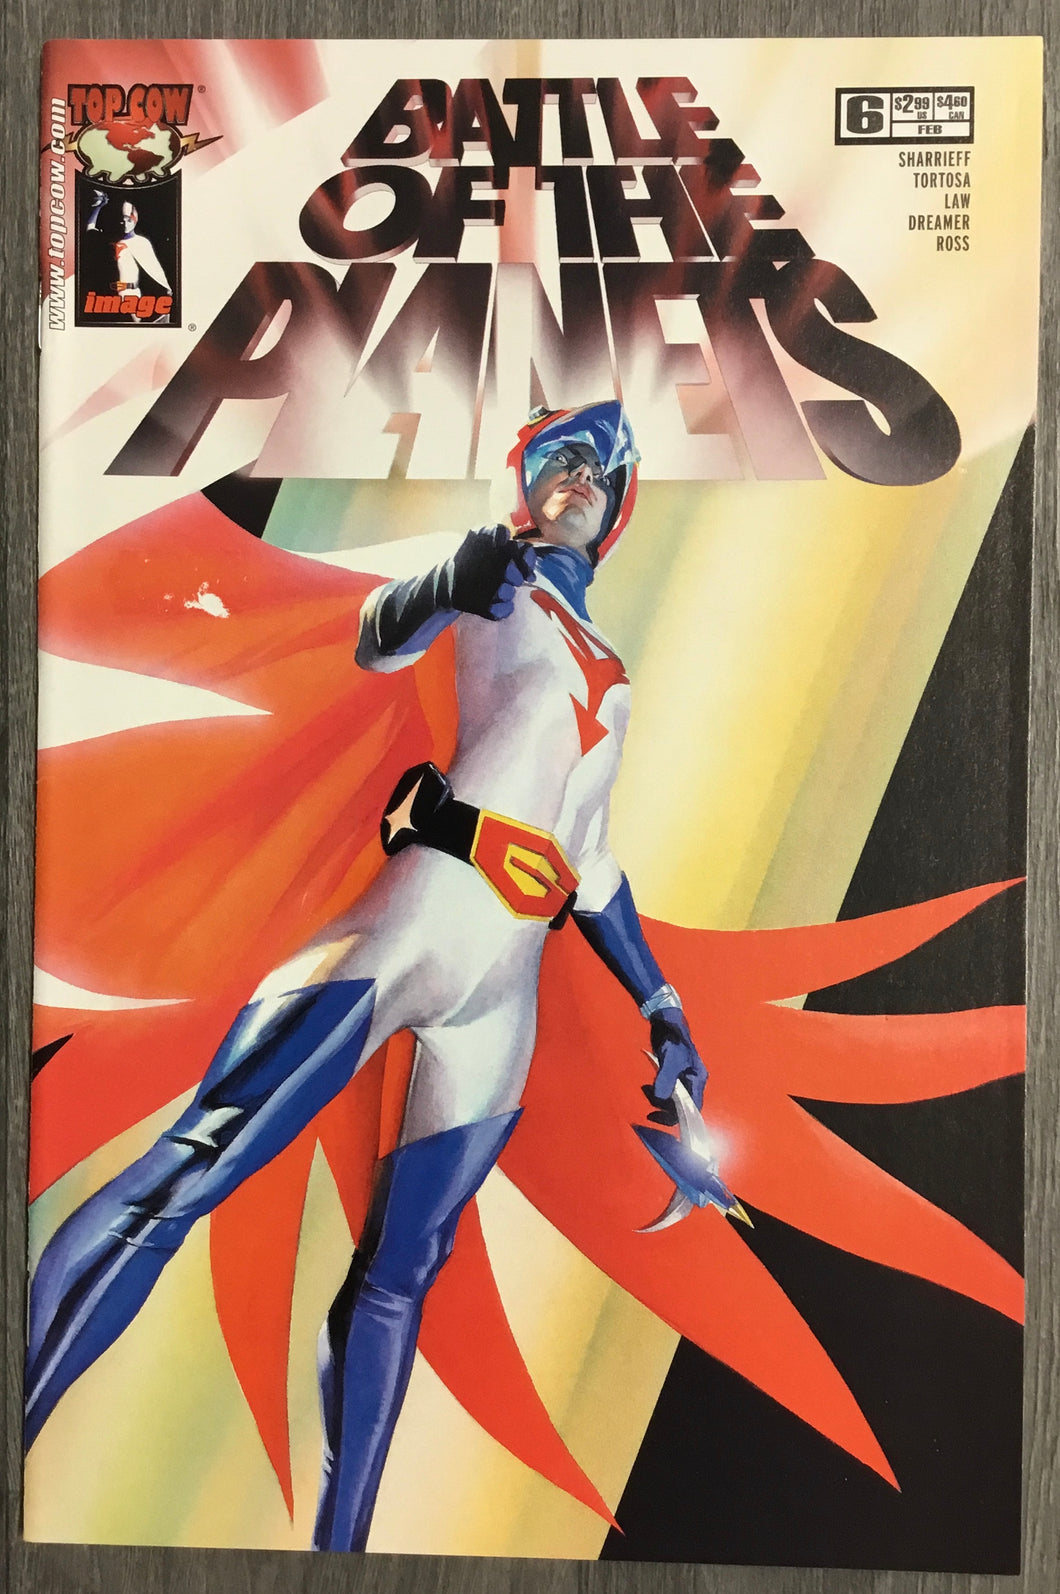 Battle of the Planets No. #6 2003 Top Cow/Image Comics